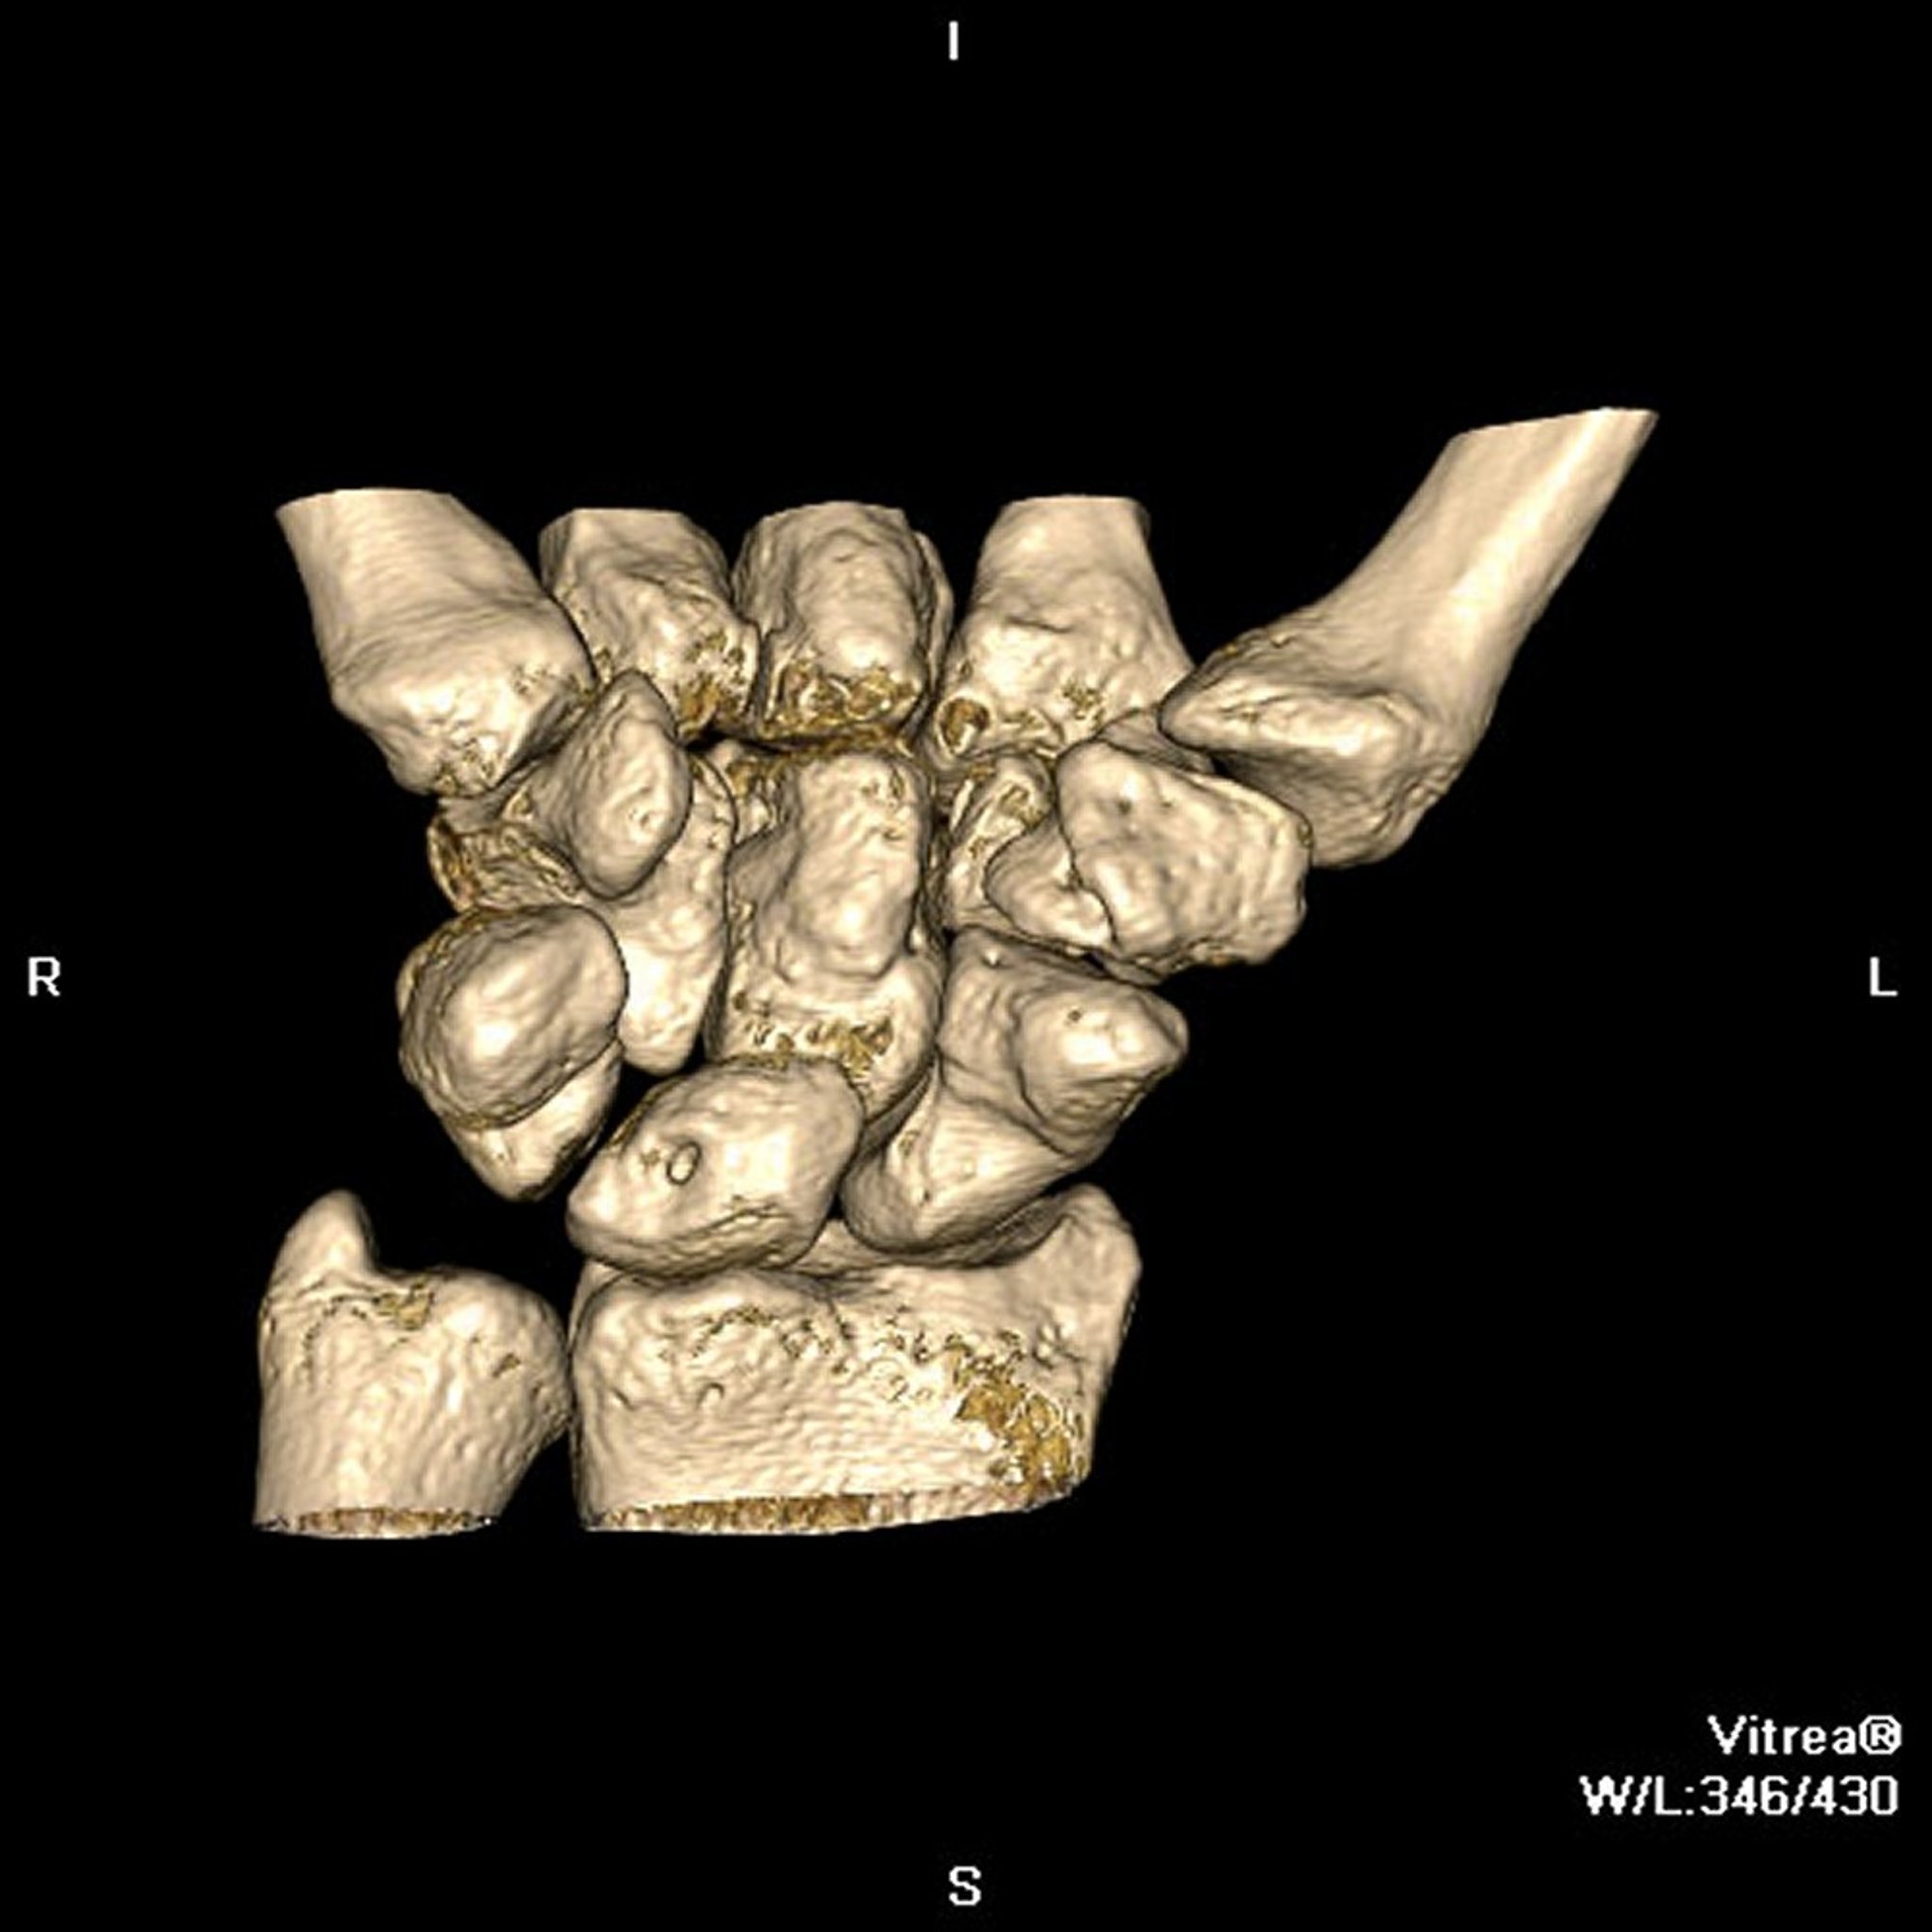 Computed Tomography (CT) of the Wrist (3-Dimensional Reconstruction)